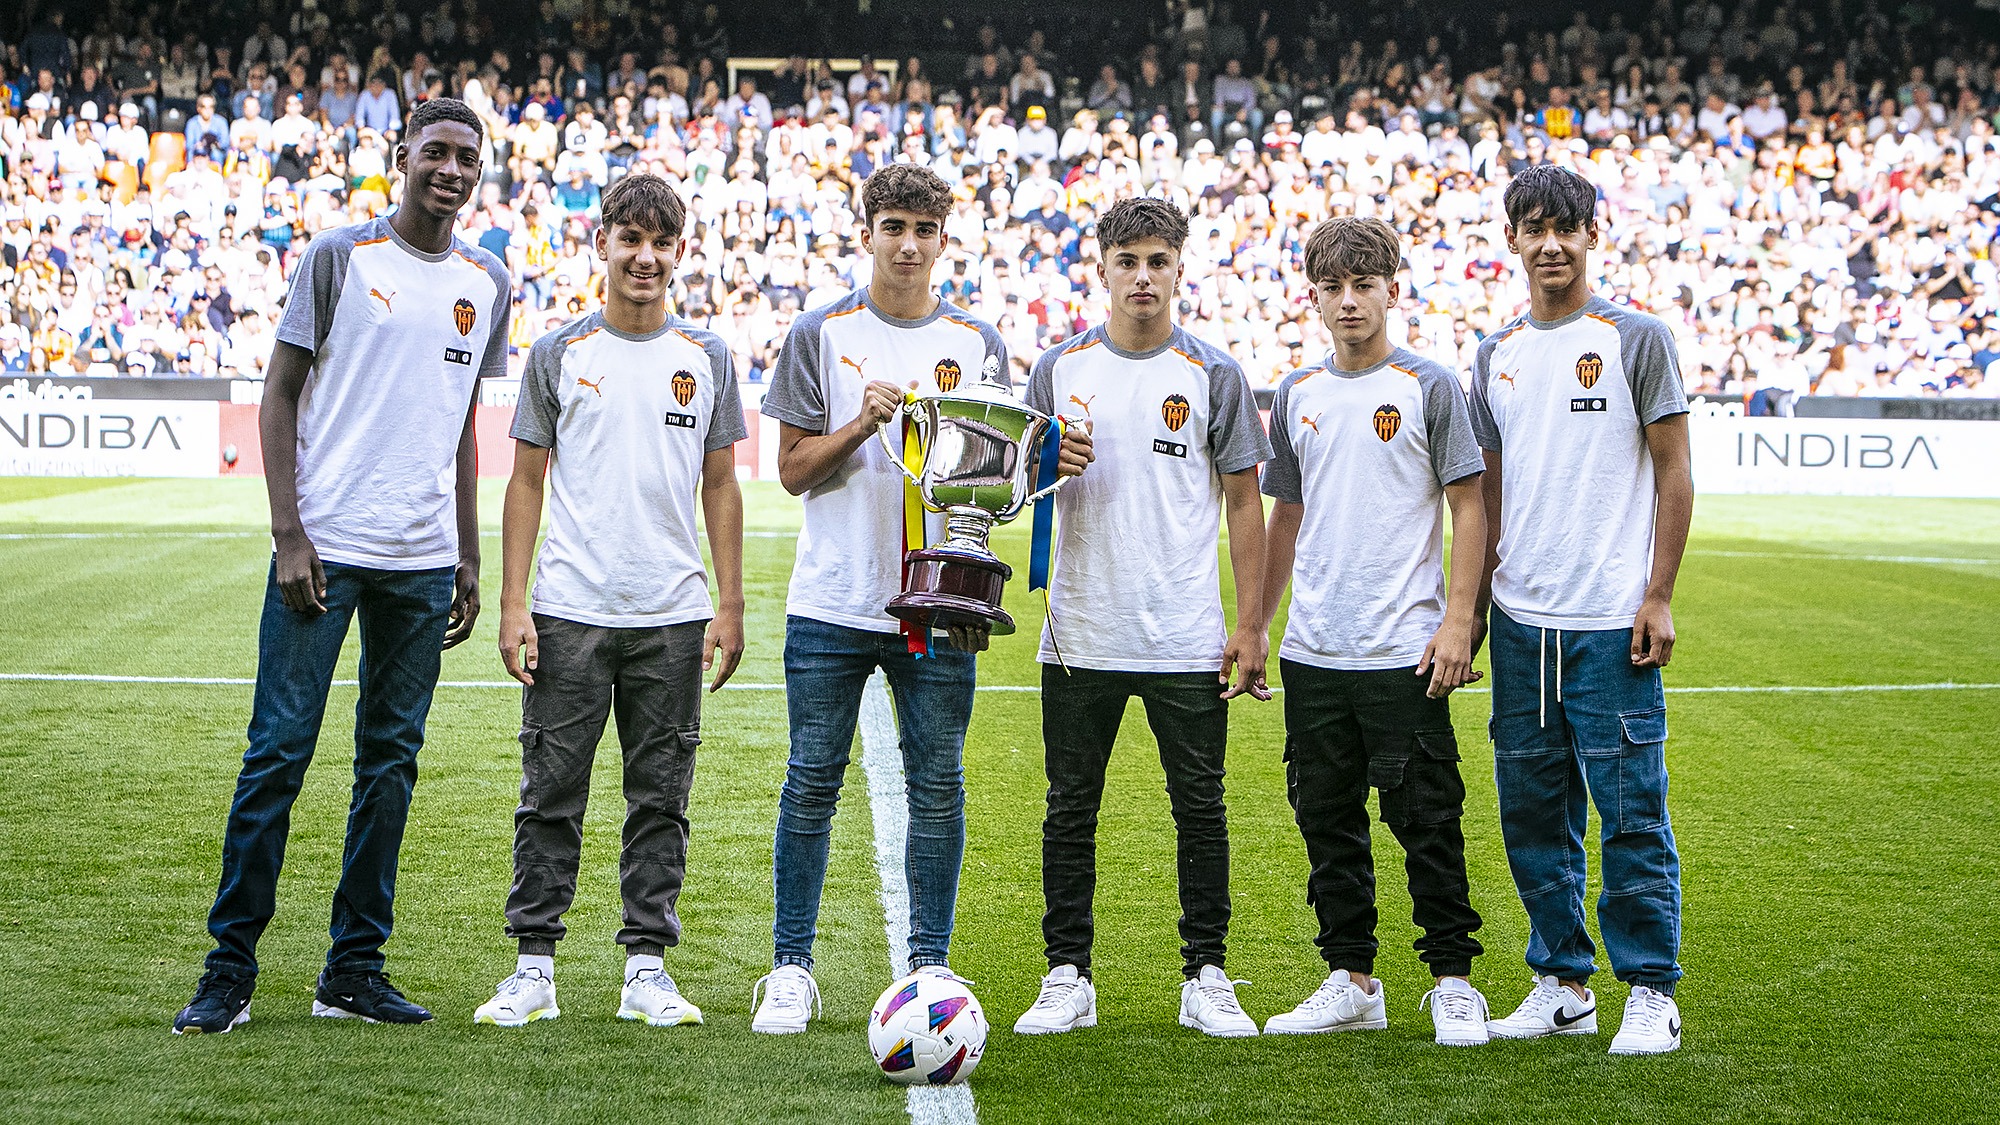 This was the recognition of Mestalla to the Spanish U-14 Champions